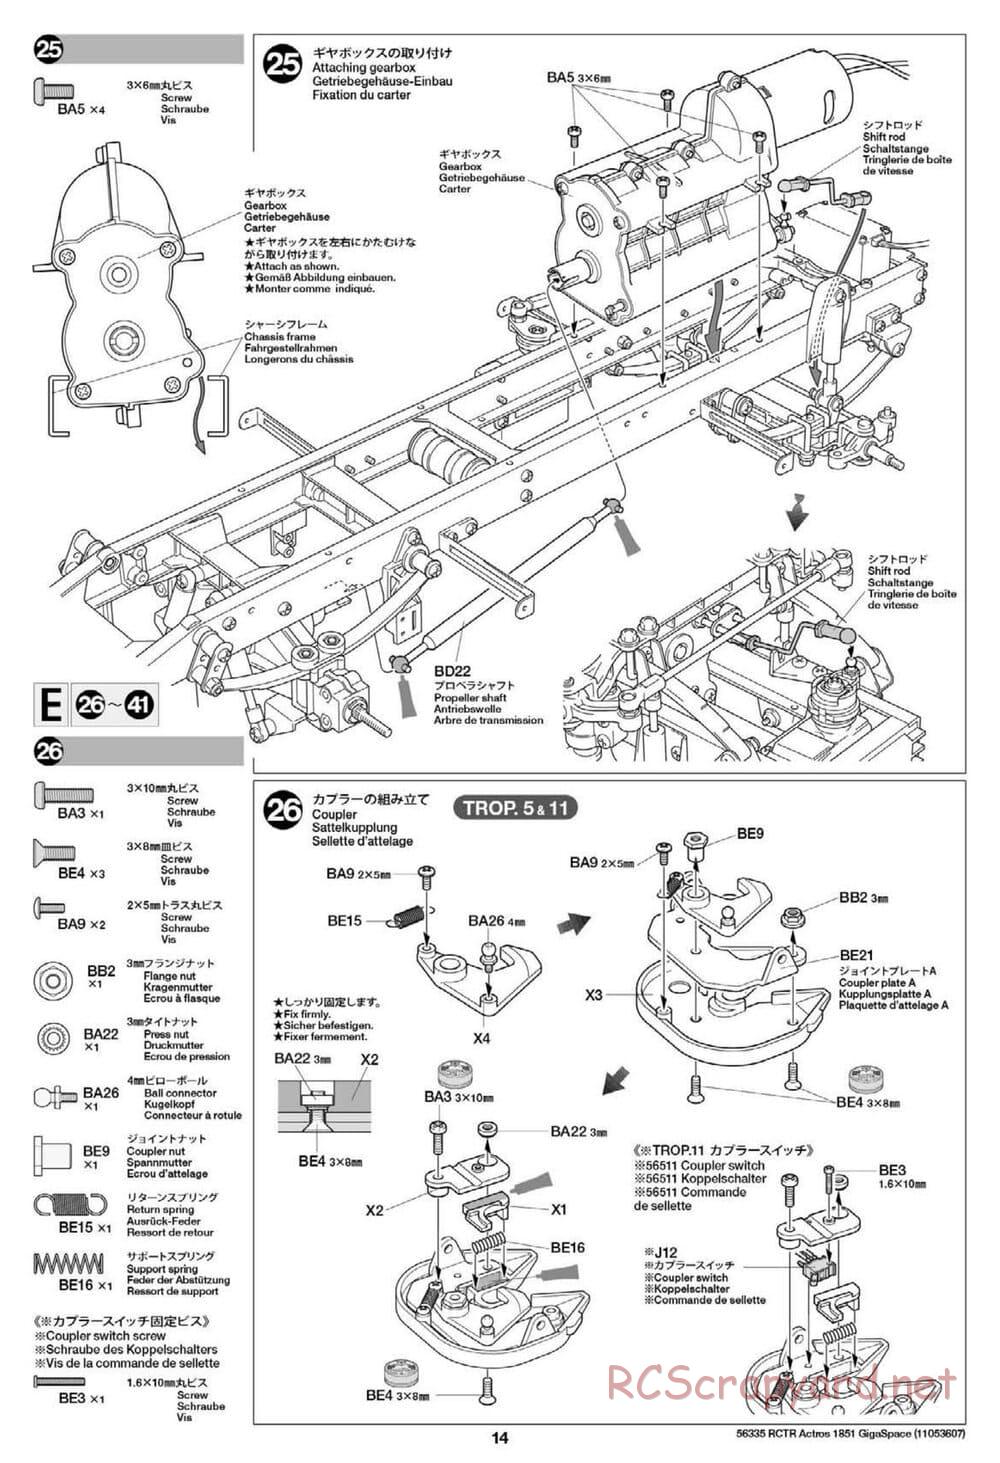 Tamiya - Mercedes-Benz Actros 1851 Gigaspace Tractor Truck Chassis - Manual - Page 14